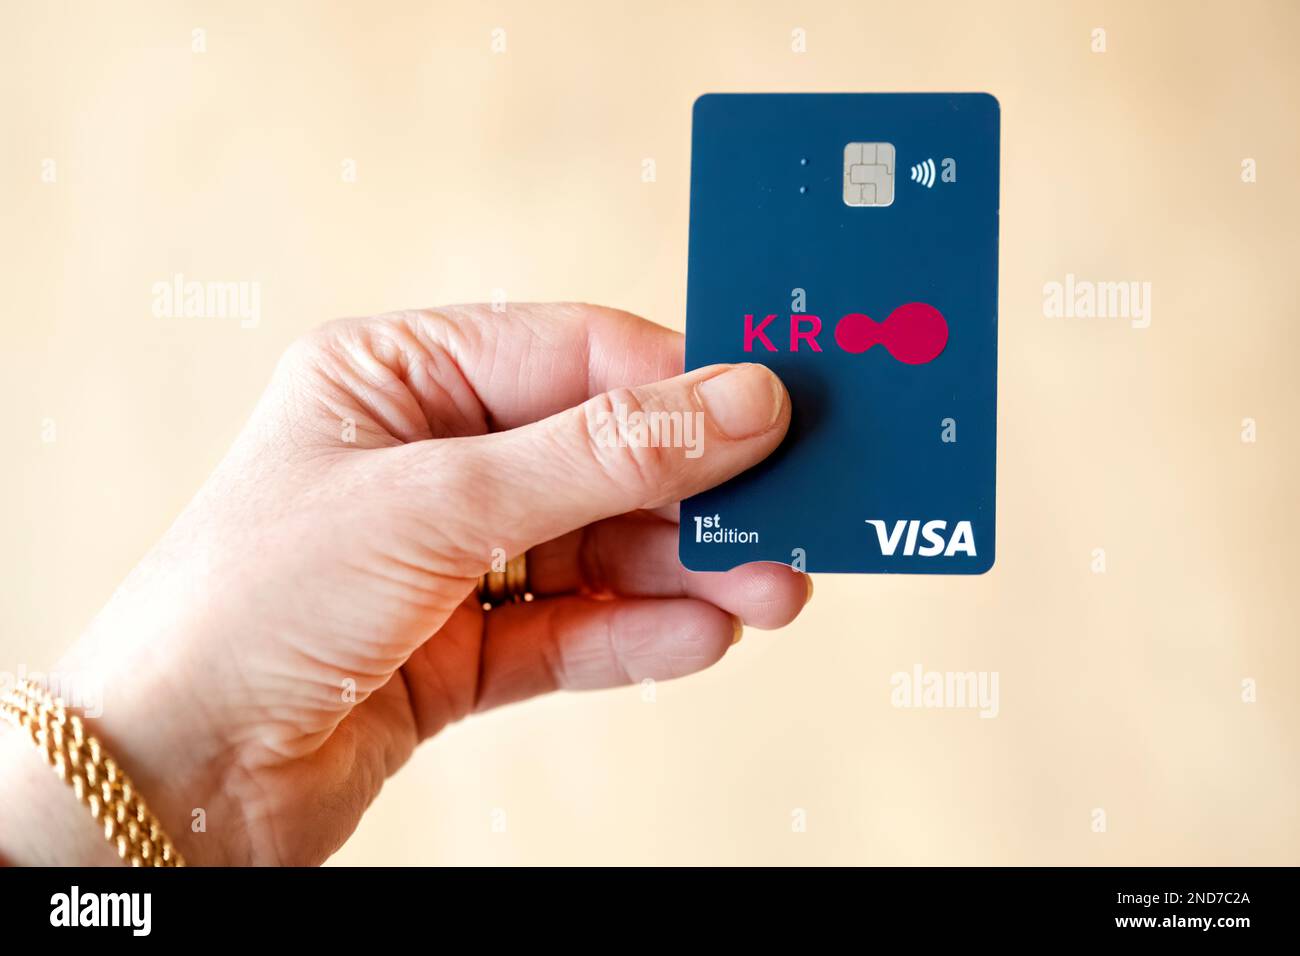 A Kroo Bank visa debit card being held by a customer. Kroo are a UK based digital Challenger bank which operates a high interest cashless  service. Stock Photo